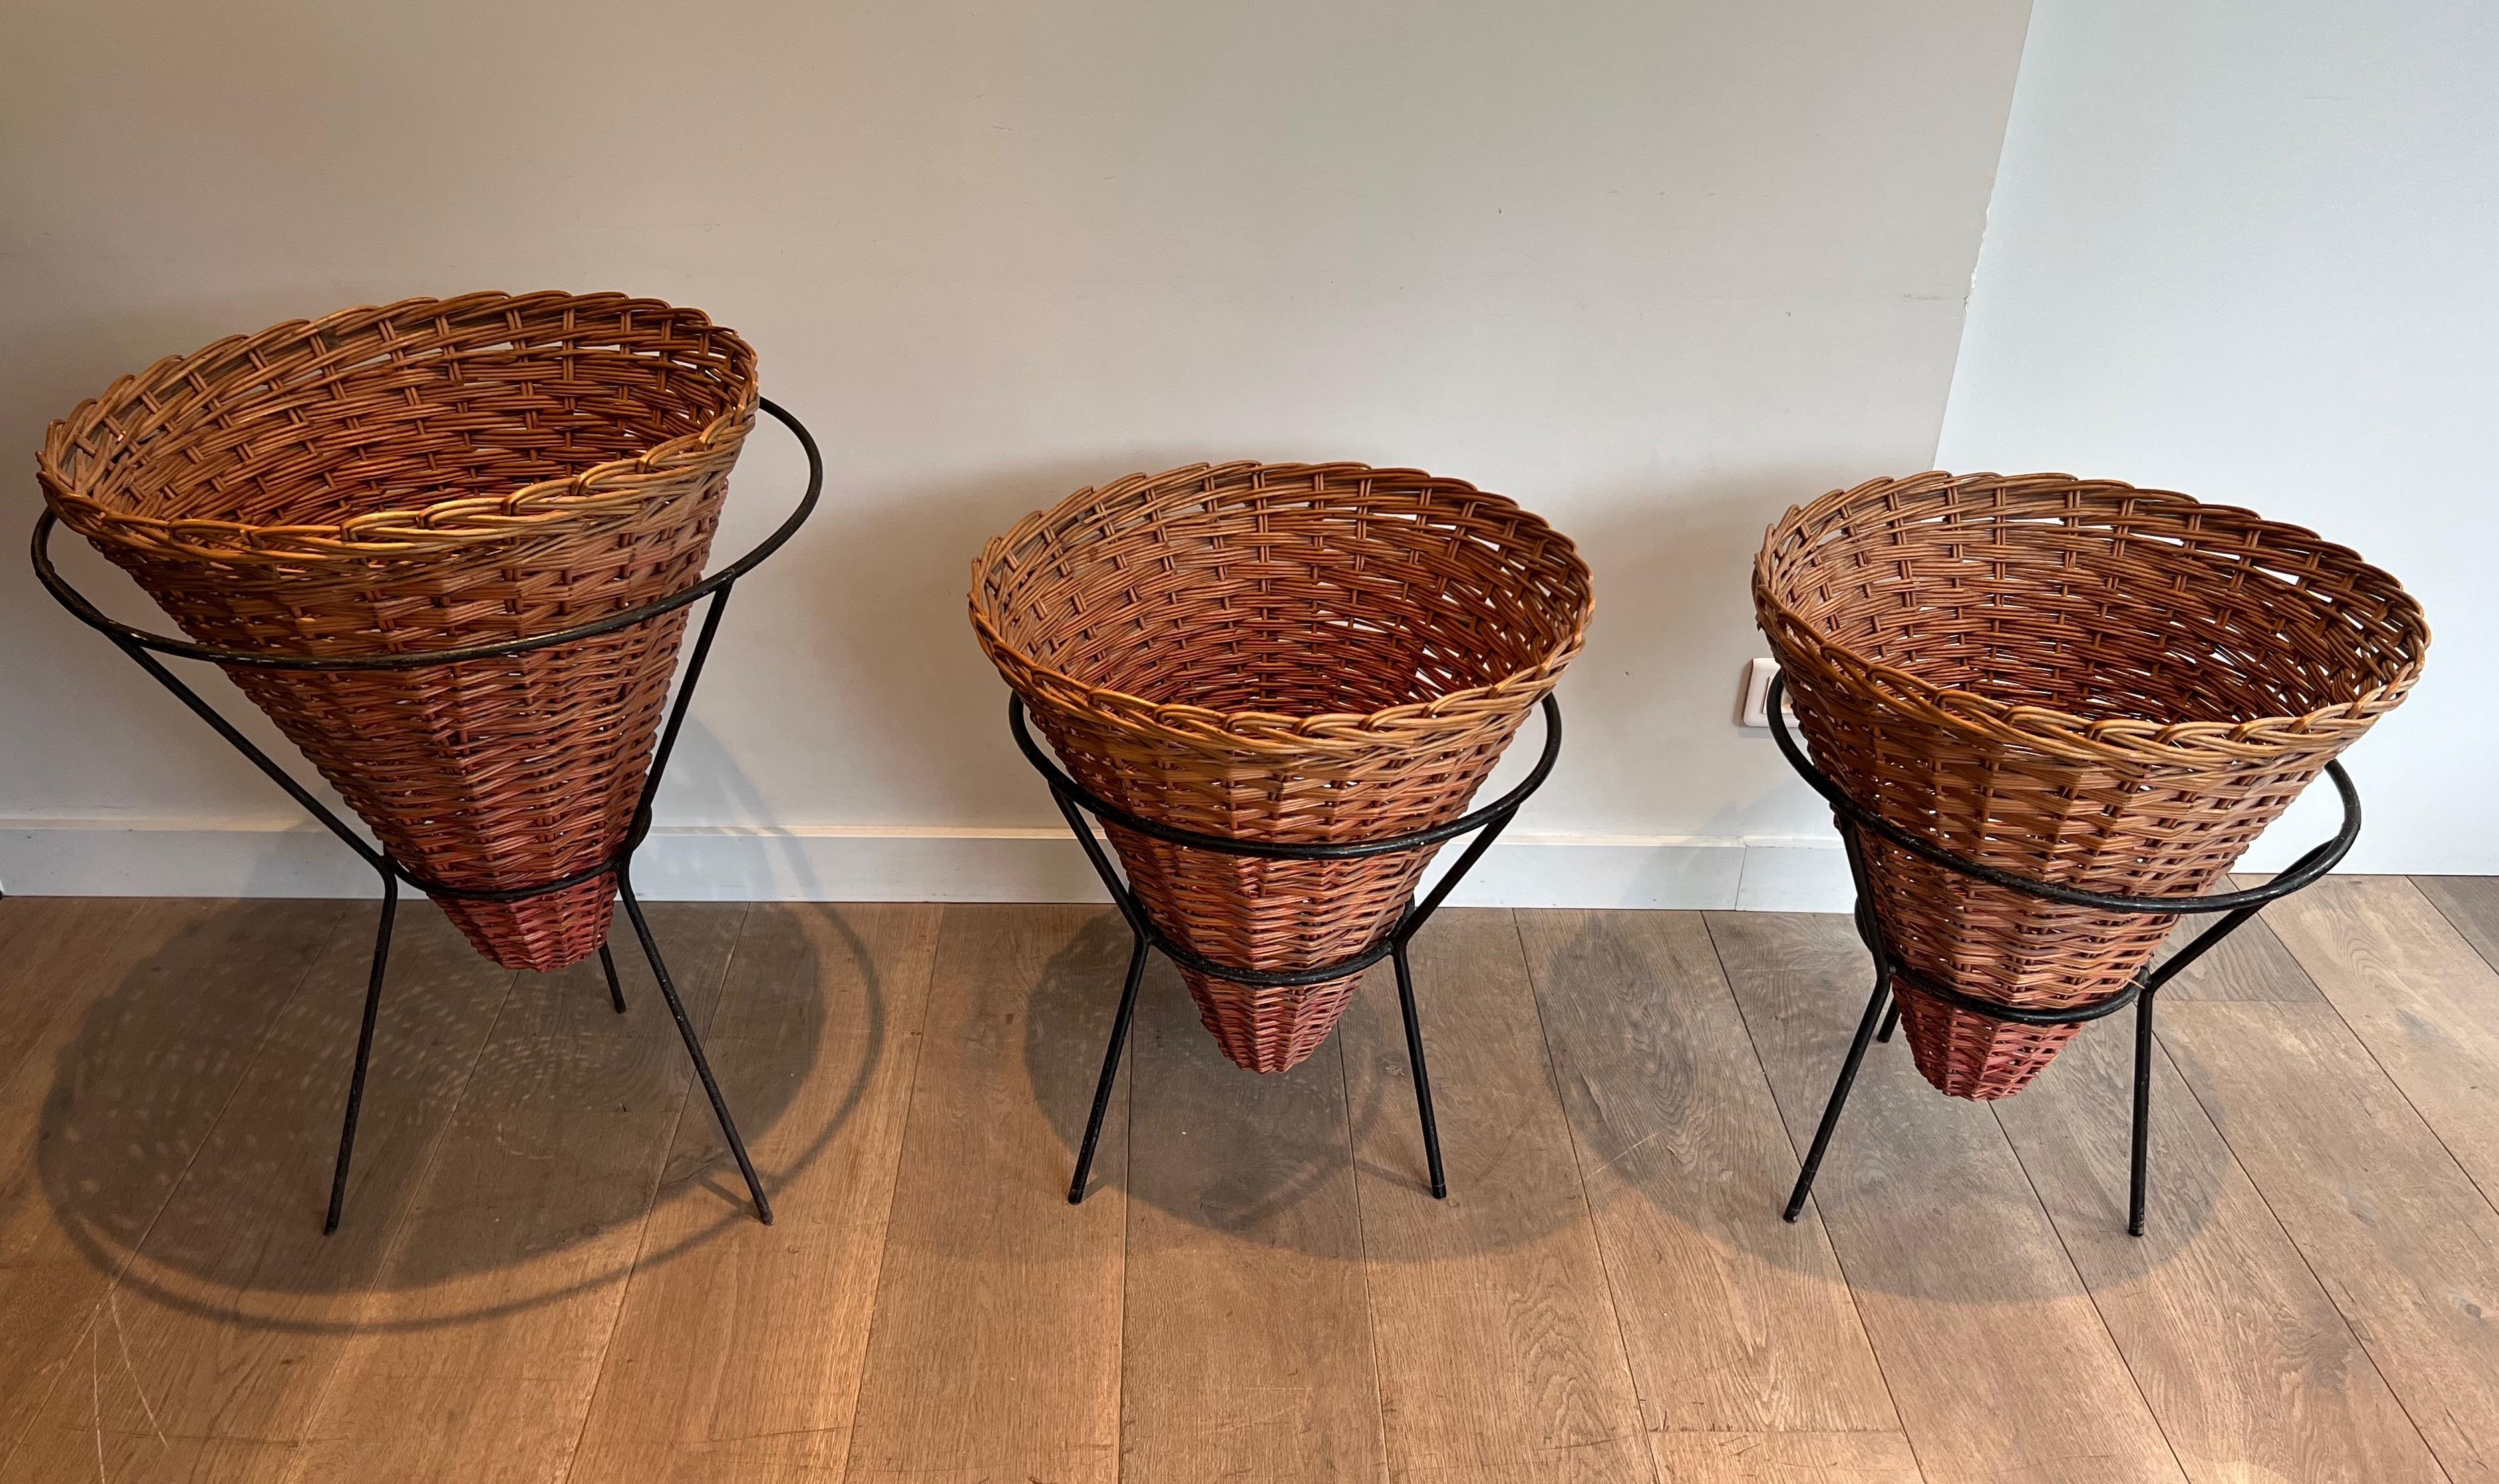 Set of Three Black Lacquered Metal and Rattan Planters, French Work, circa 1950 For Sale 7